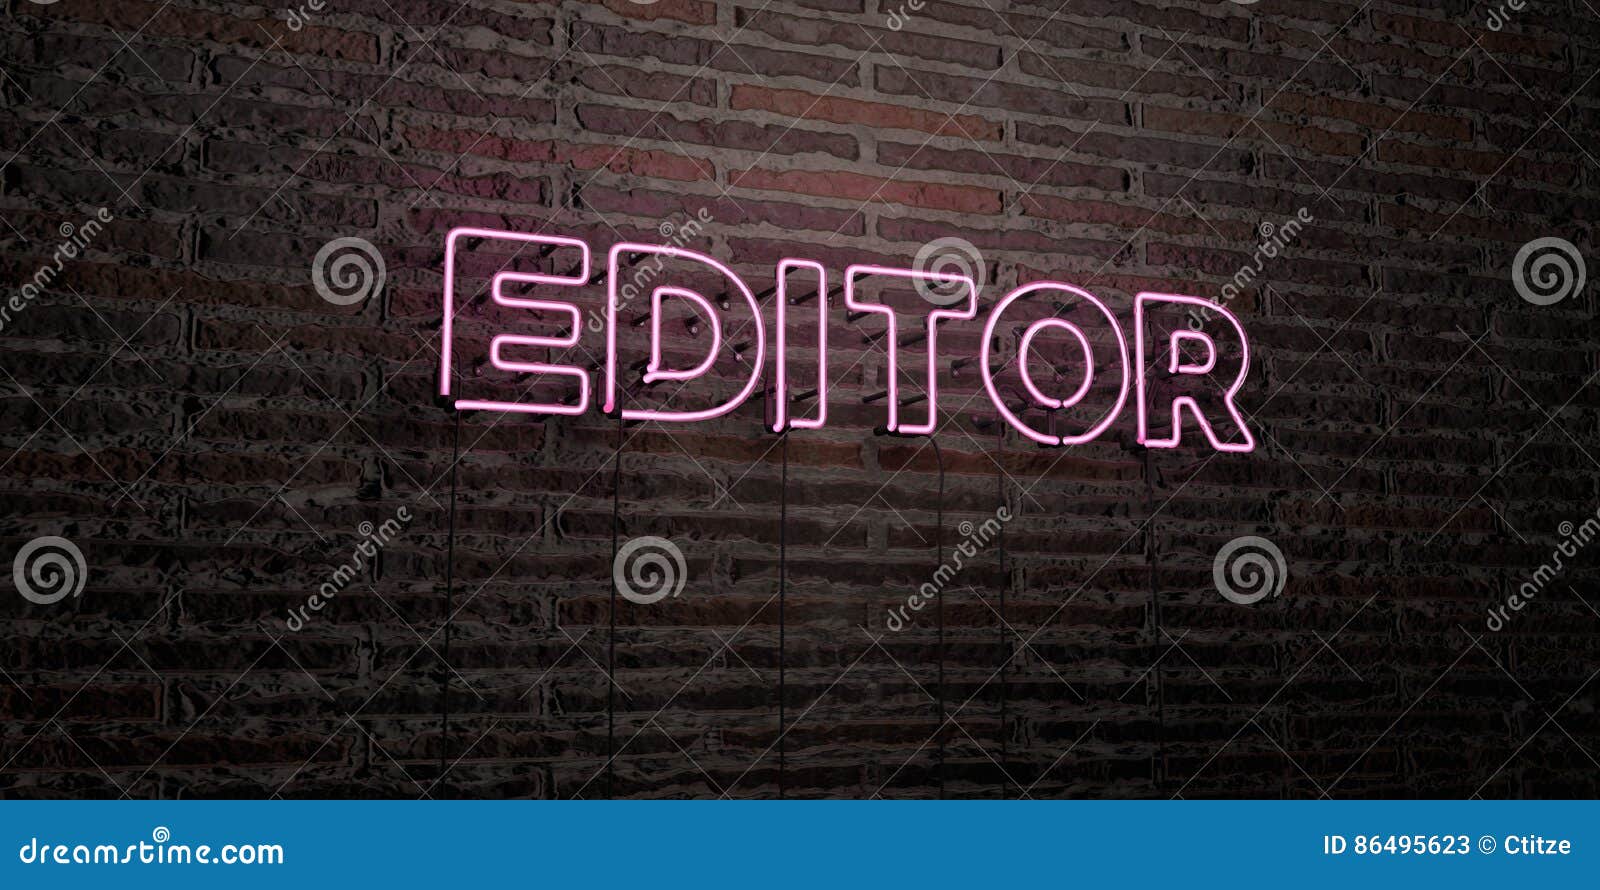 EDITOR -Realistic Neon Sign on Brick Wall Background - 3D Rendered Royalty  Free Stock Image Stock Illustration - Illustration of masonry, light:  86495623